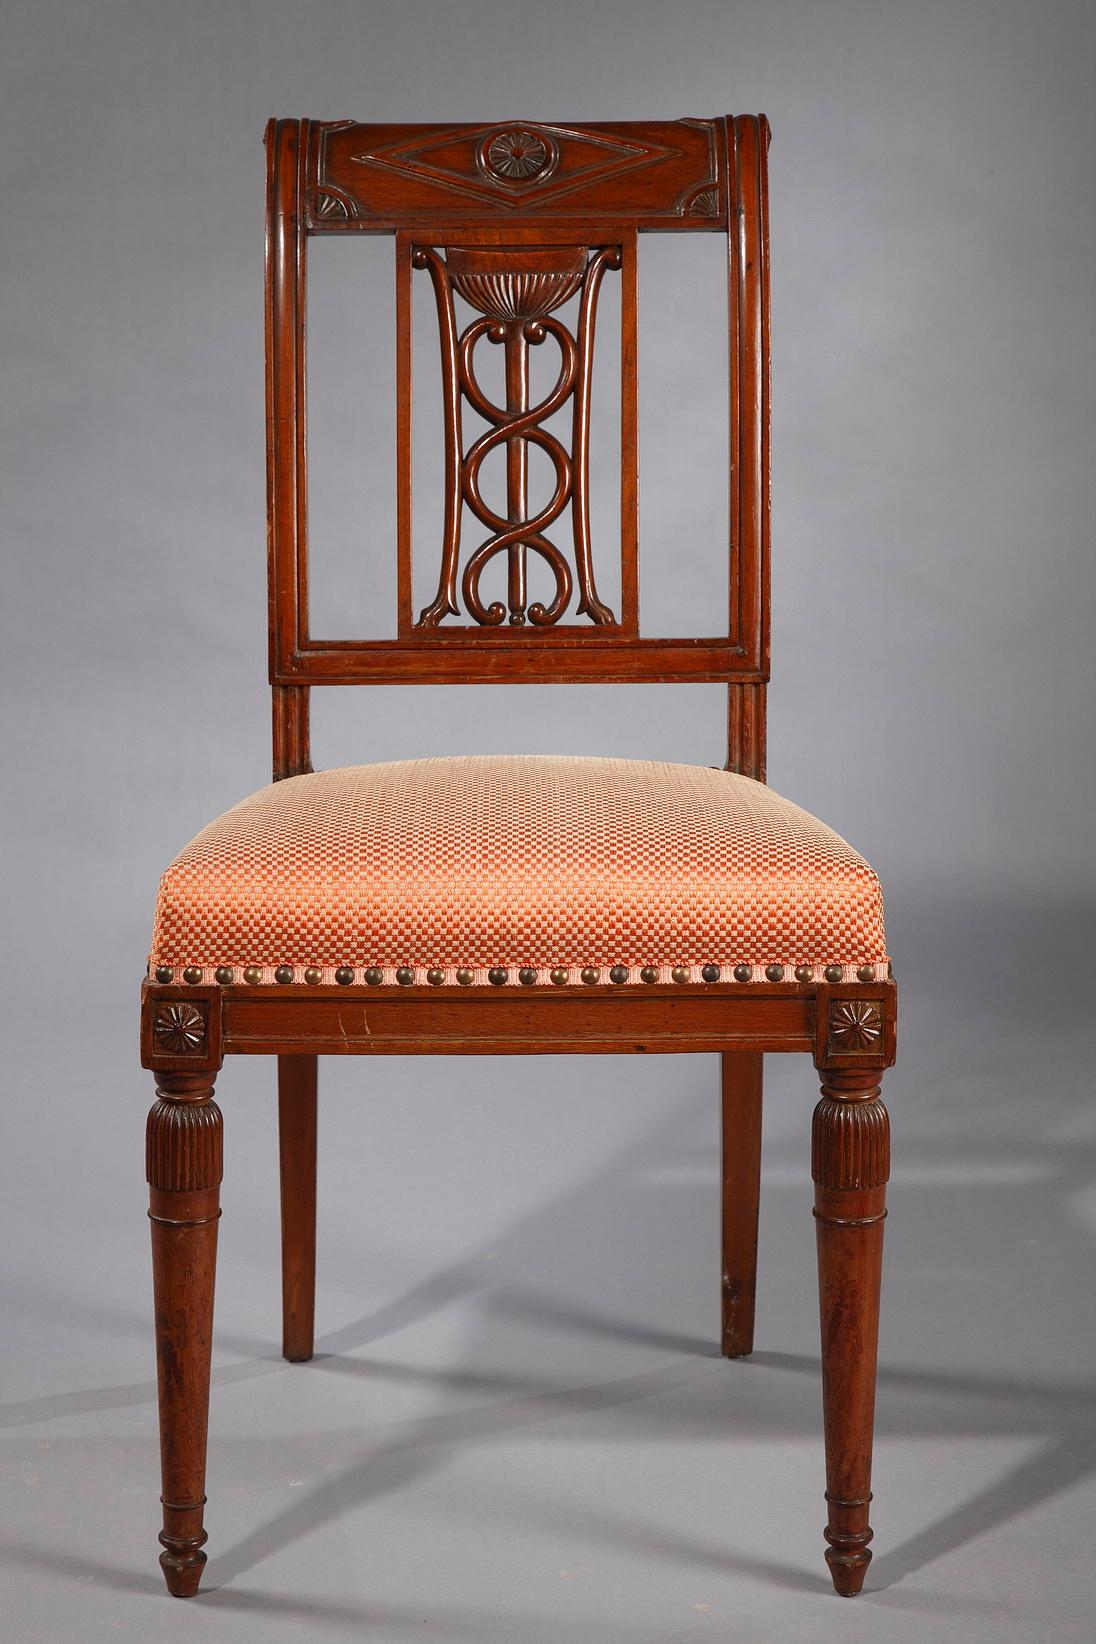 Bear the stamp JB Jacob

Fine set of six chairs, with an openwork backrest carved in the upper part with a wheel in a diamond and on the corners, and on the lower part with a tripod with a fluted bowl in a frame. They rest on straight front feet and